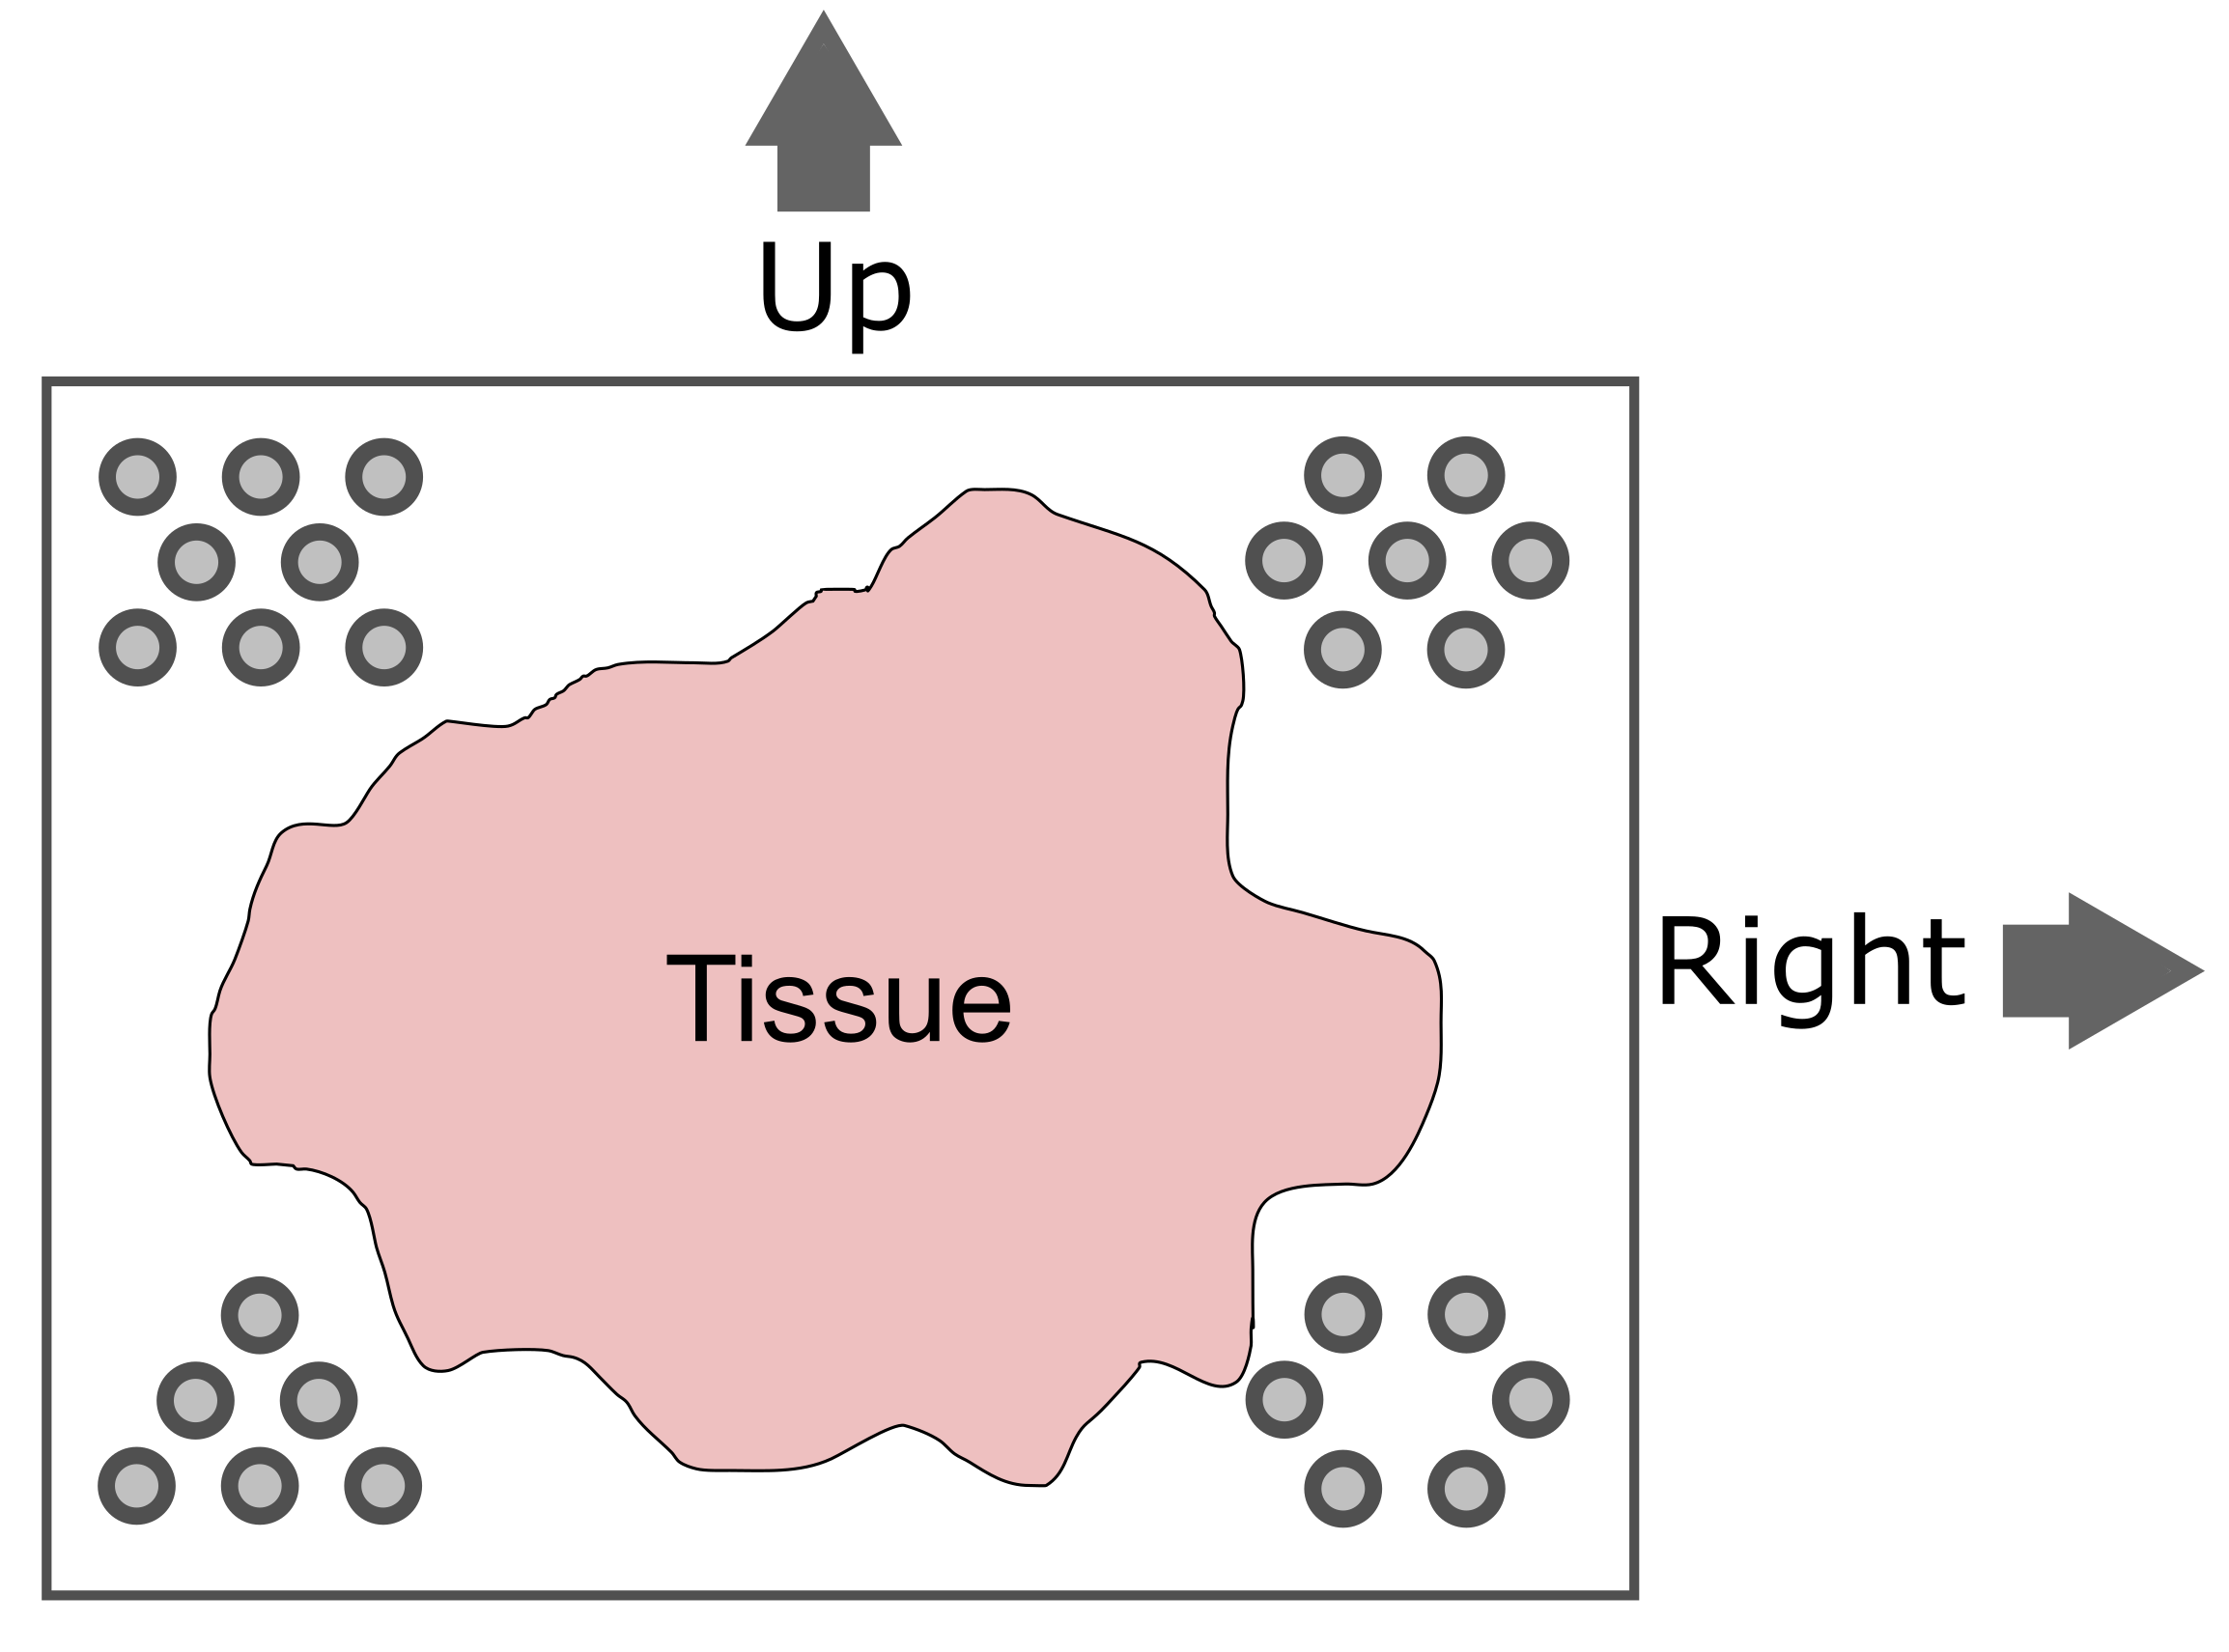 Diagram showing tissue and registration spots in corners